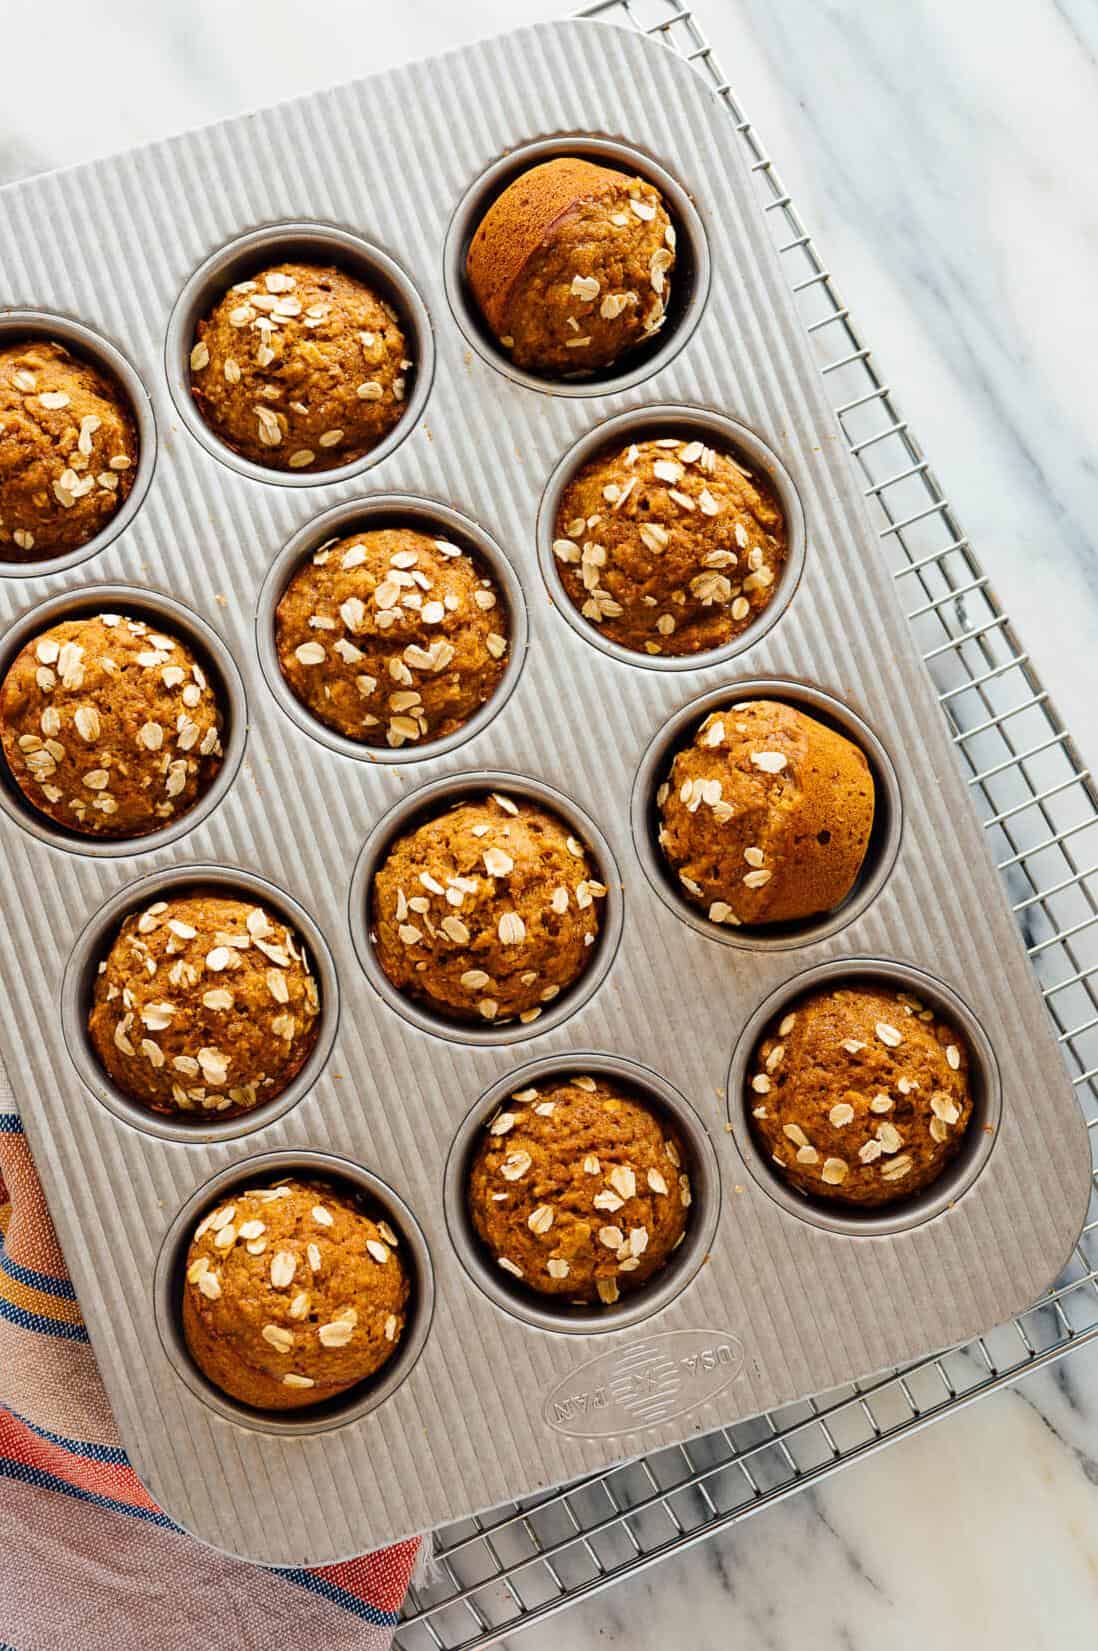  Sunday morning breakfast never tasted so good with these delicious muffins.